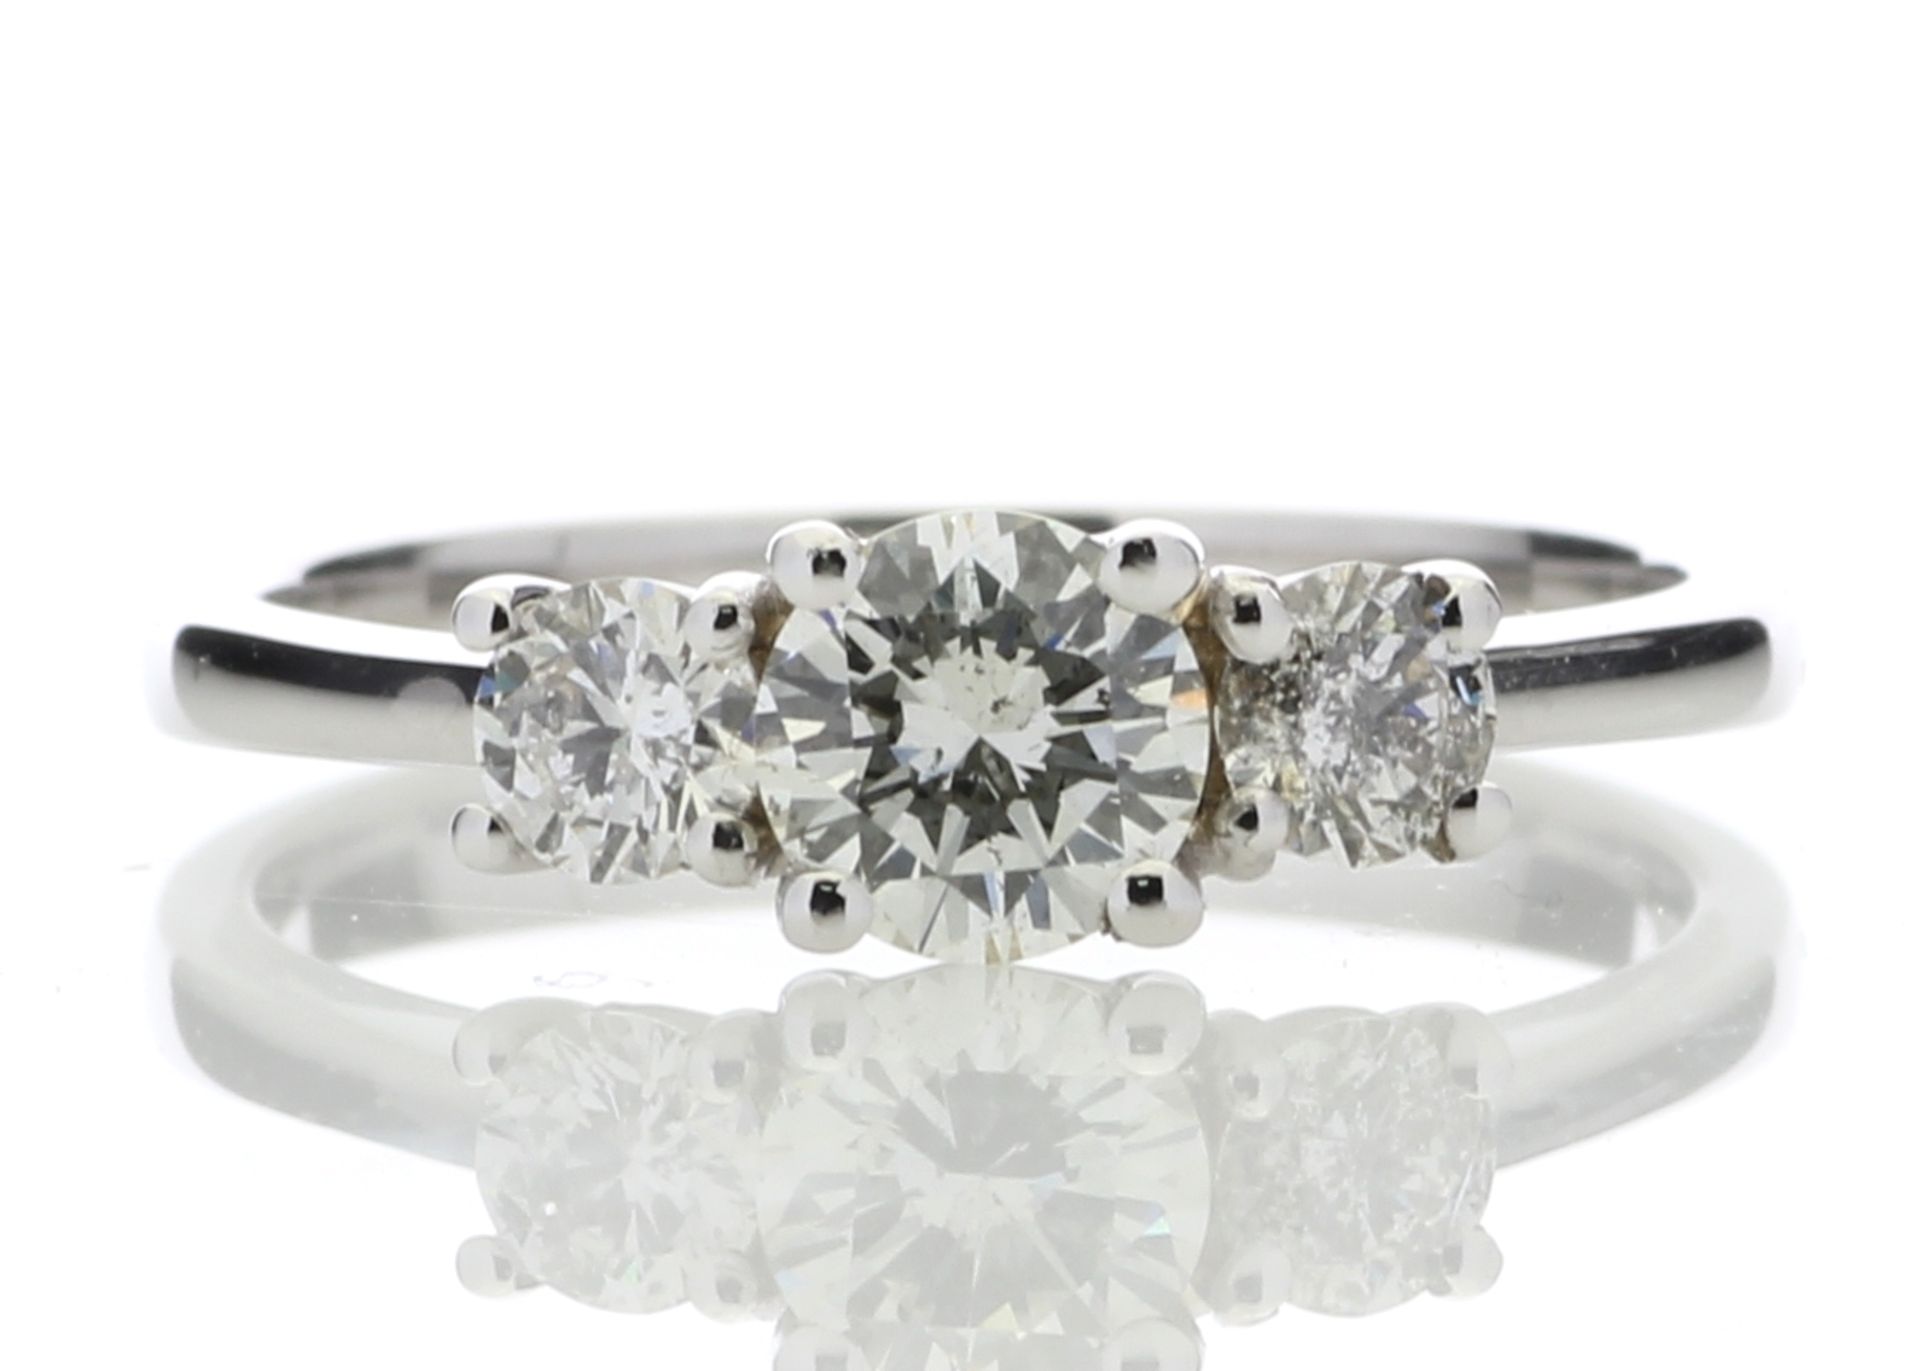 18ct White Gold Three Stone Claw Set Diamond Ring 0.77 Carats - Valued by GIE £14,595.00 - 18ct